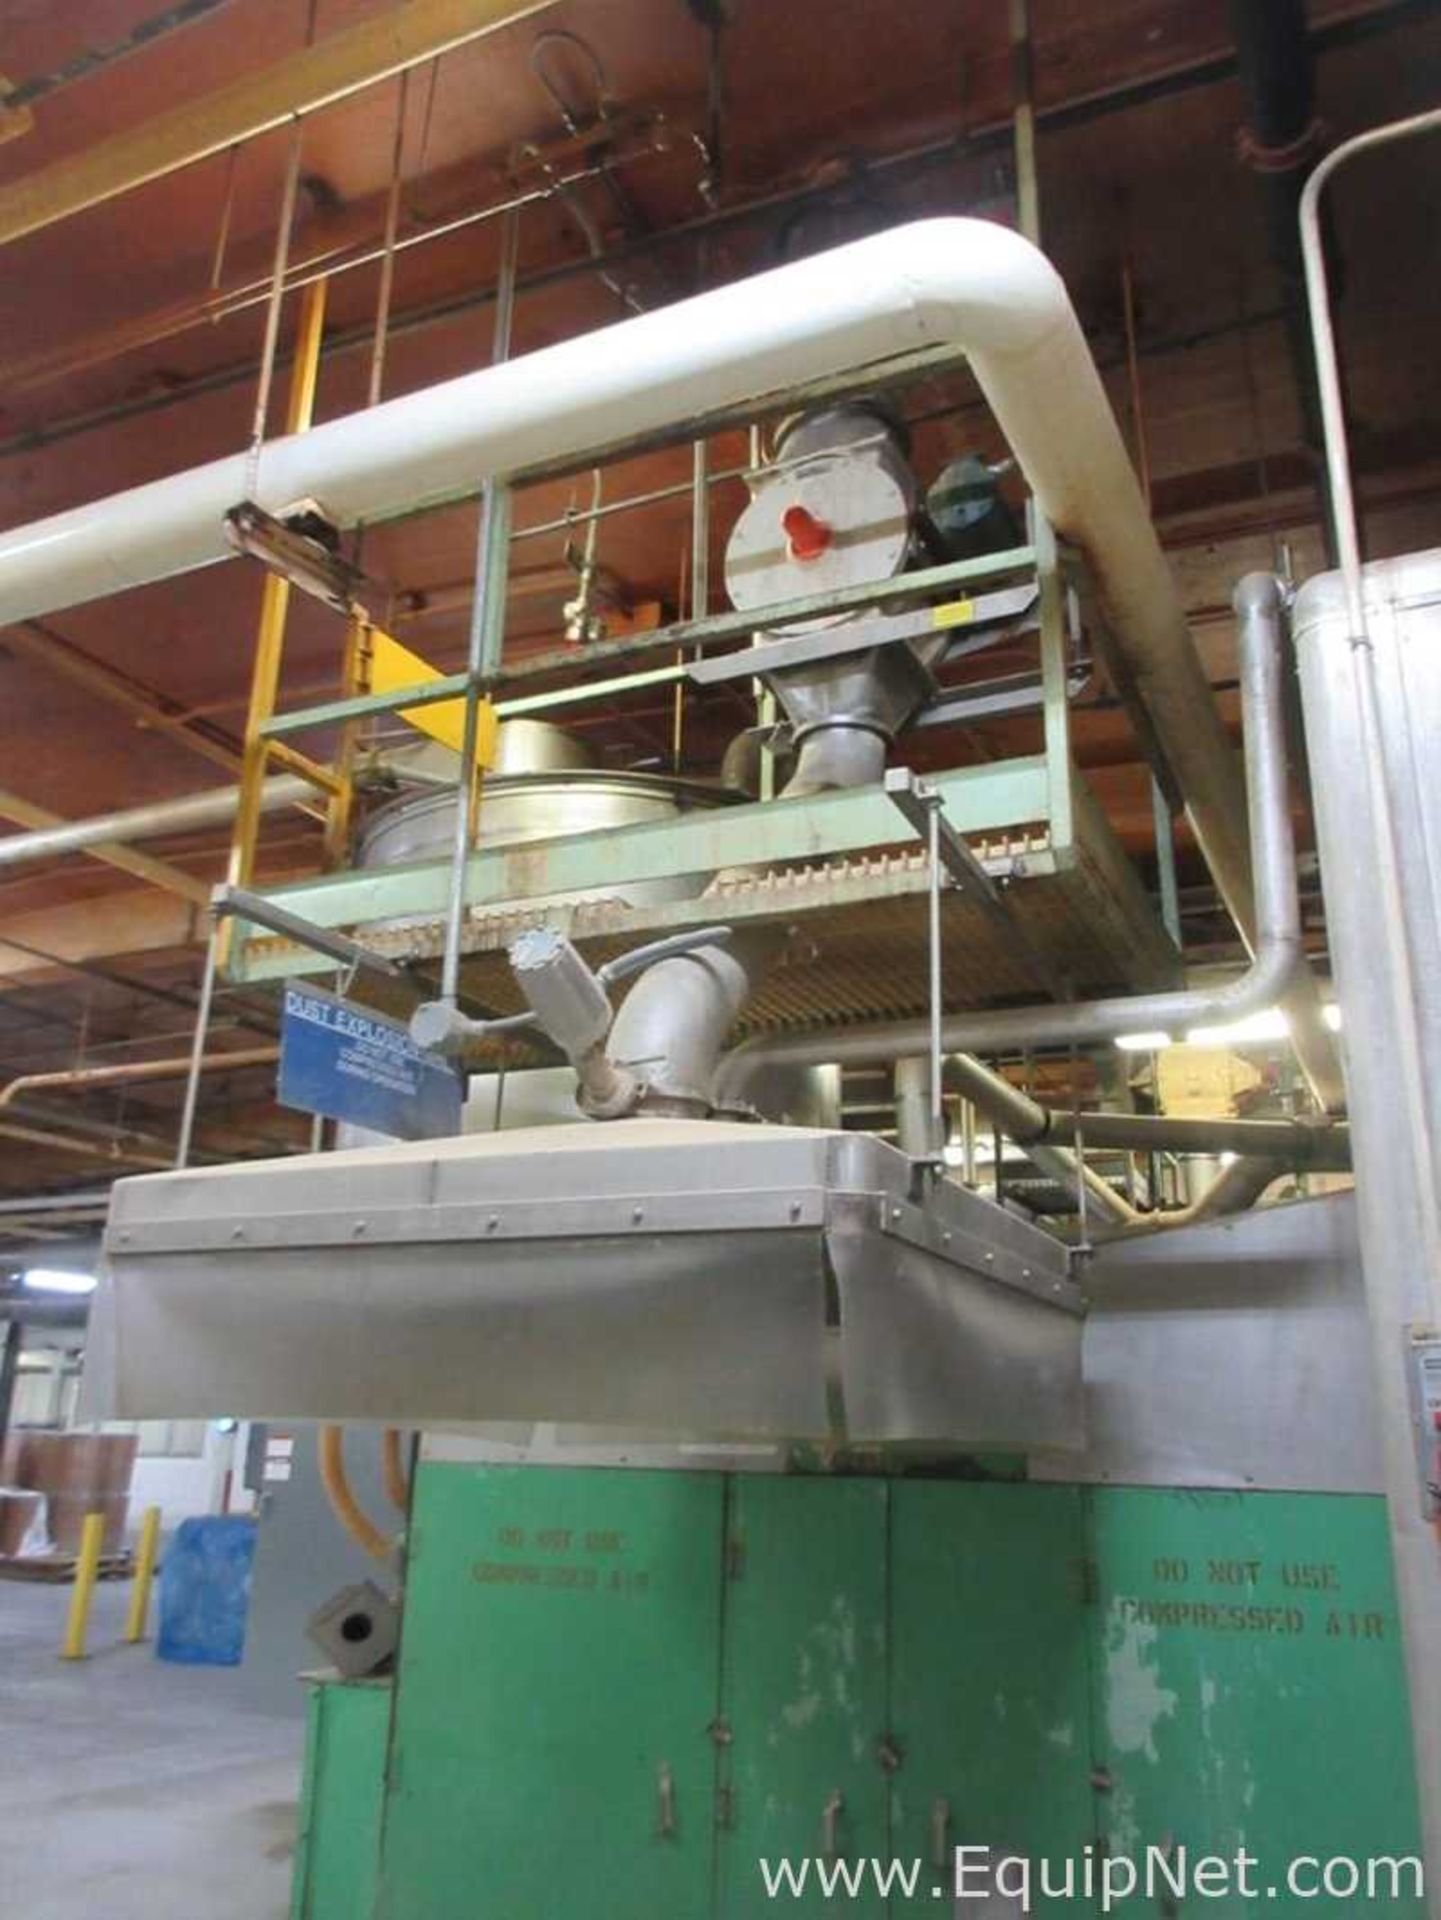 EQUIPNET LISTING #597061; REMOVAL COST: $0; DESCRIPTION: National Drying Machinery Belt - Image 24 of 27